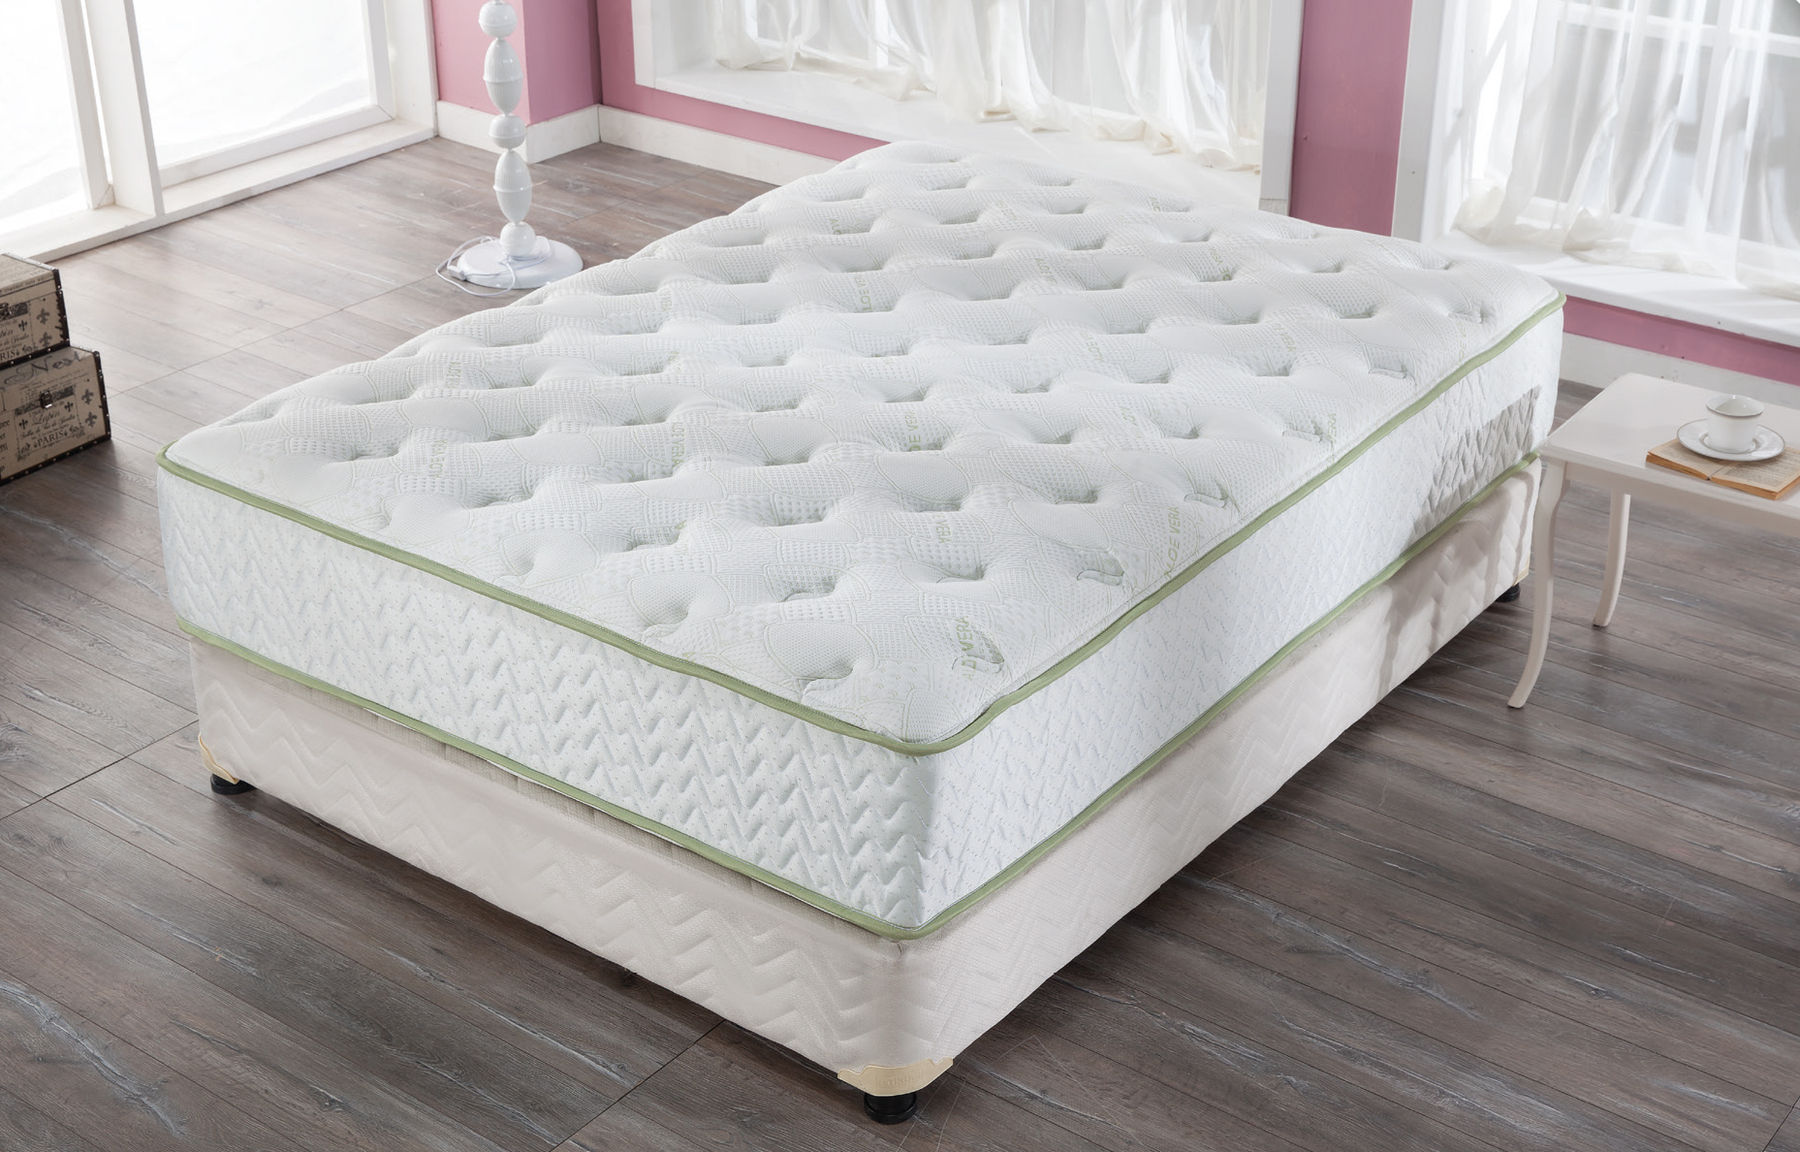 Cocoon Chill Mattress Review 2021: Sealy's Bed in a Box